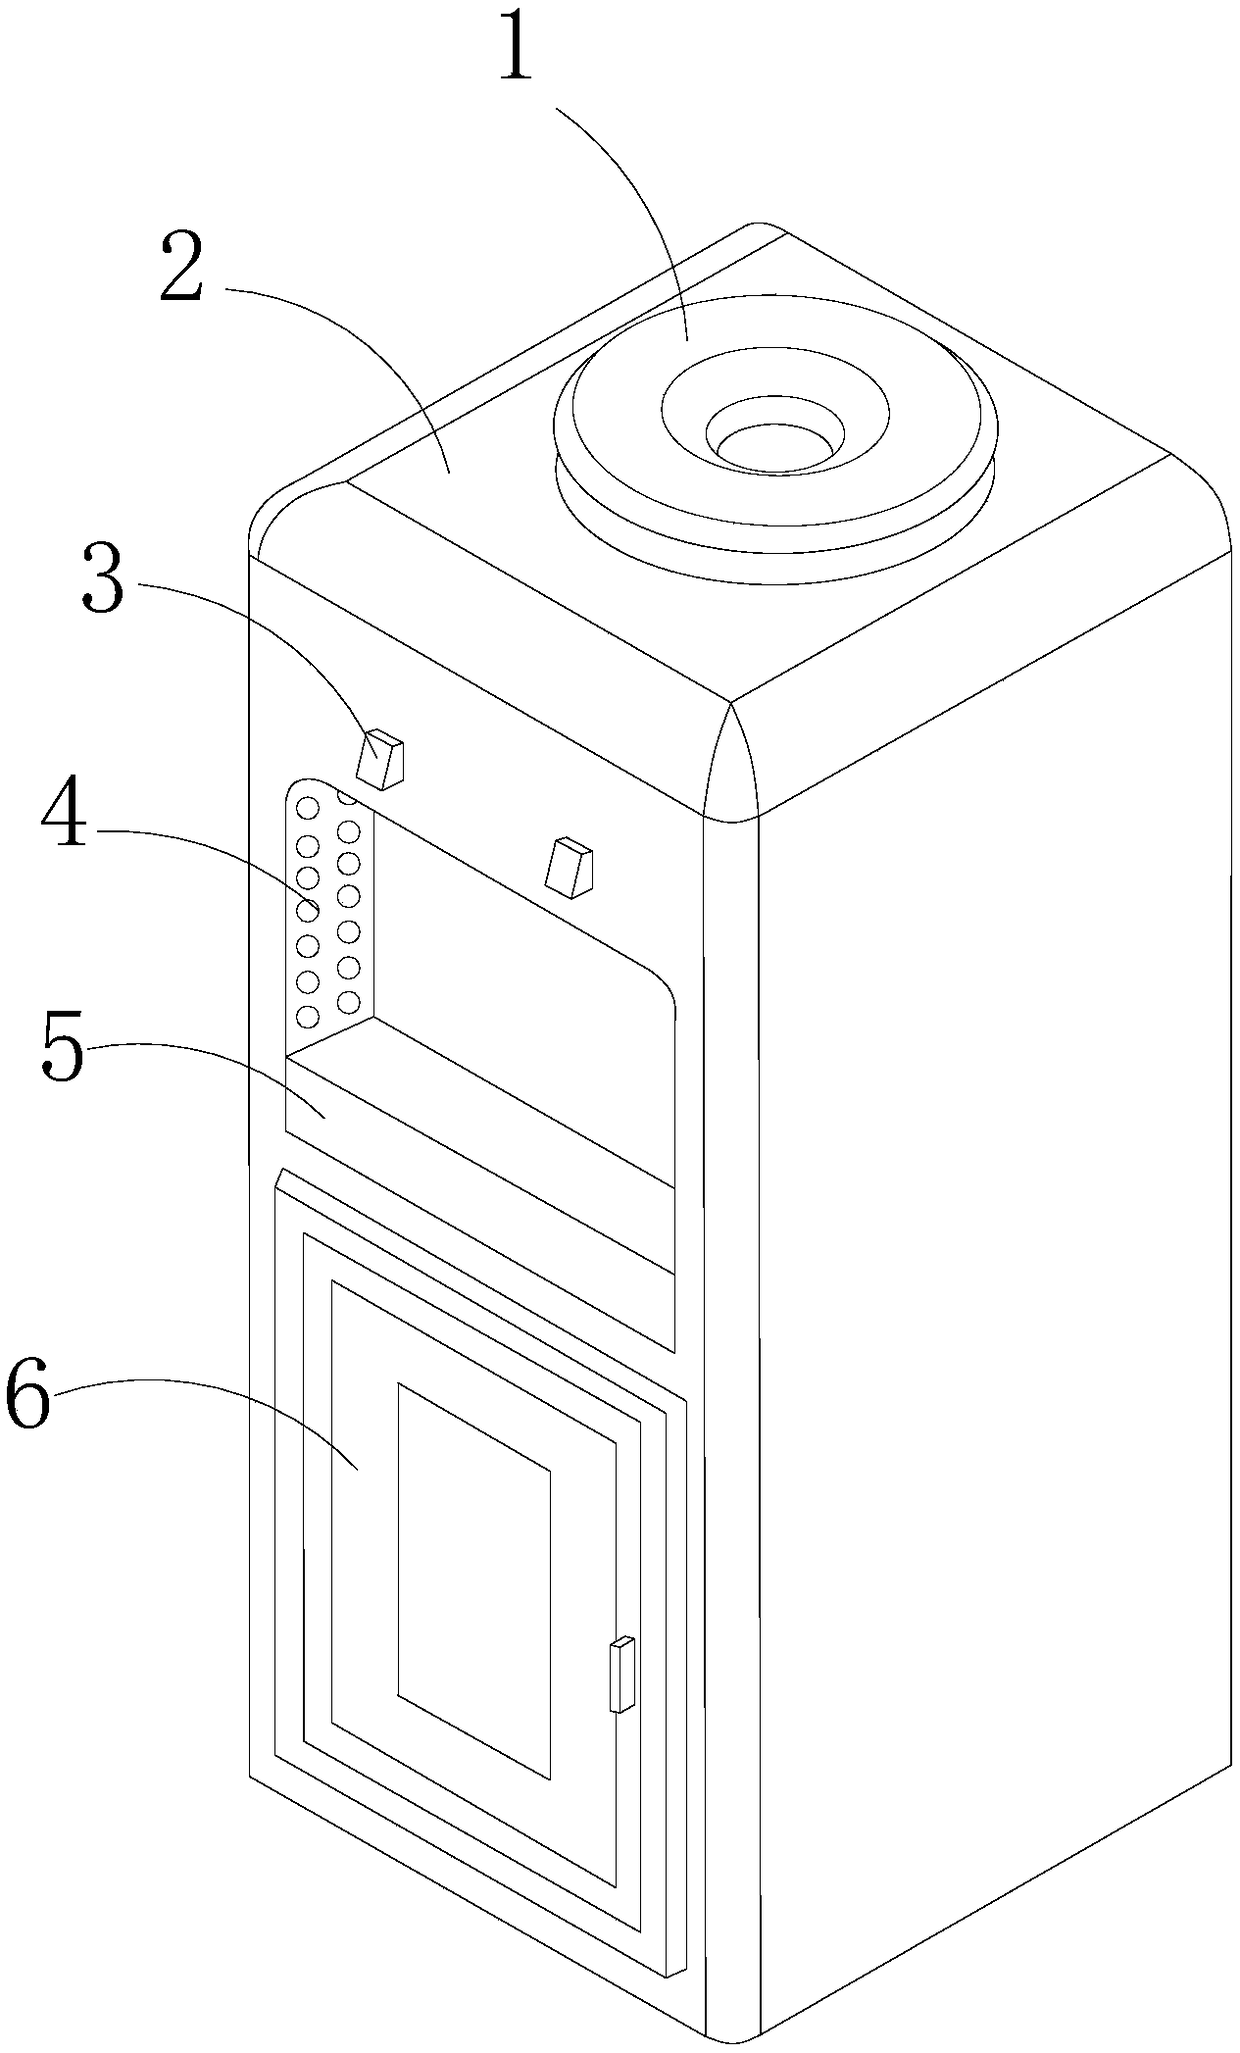 Water dispenser for triggering lighting device based on size change of water outlet